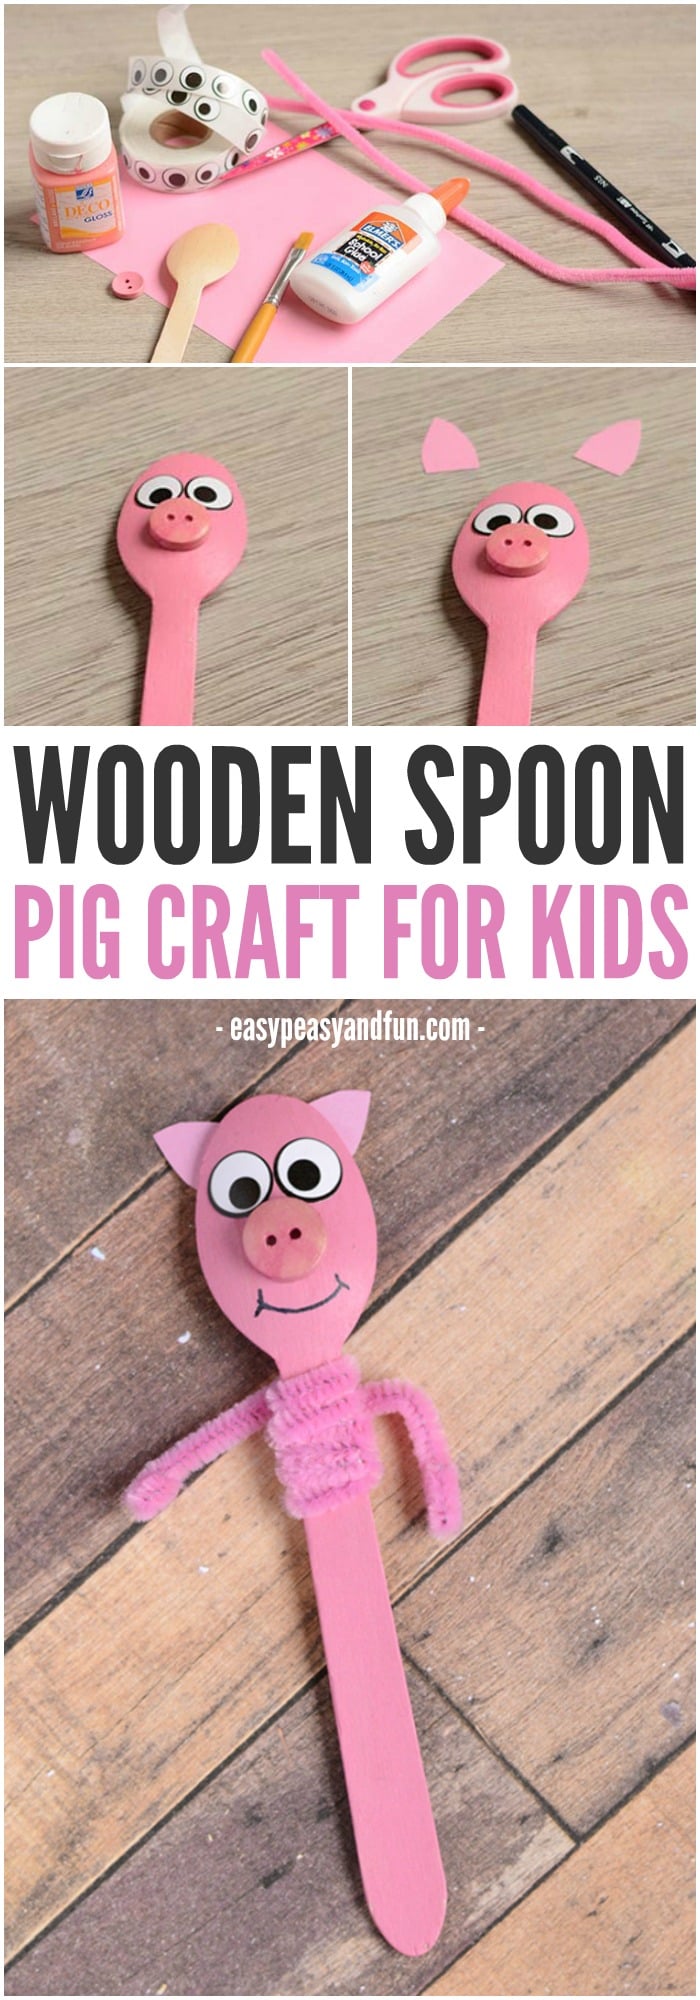 Wooden Spoon Pig Craft